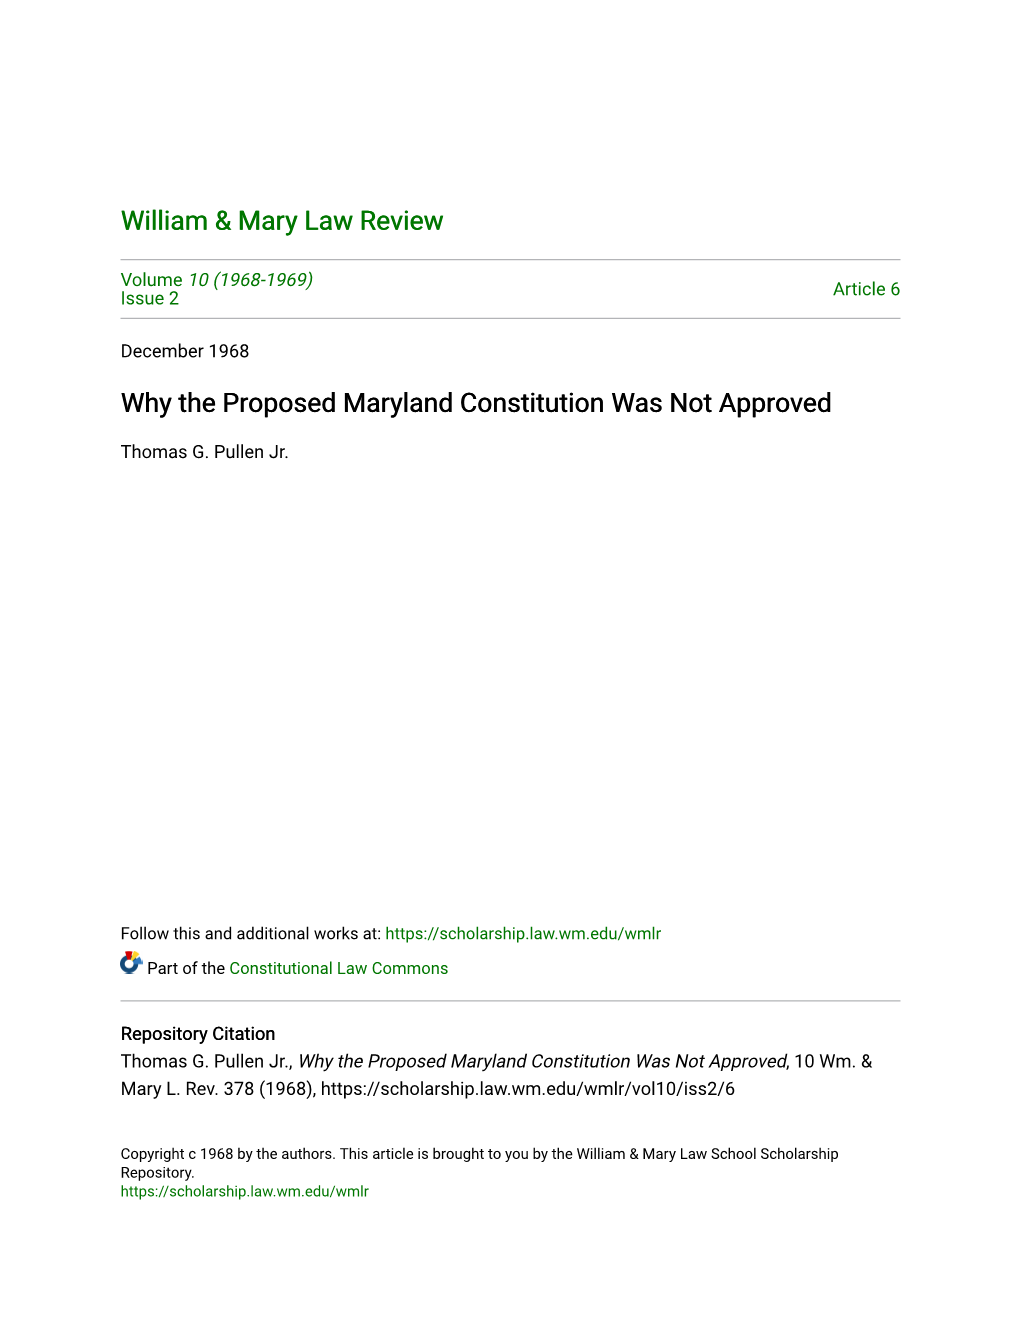 Why the Proposed Maryland Constitution Was Not Approved